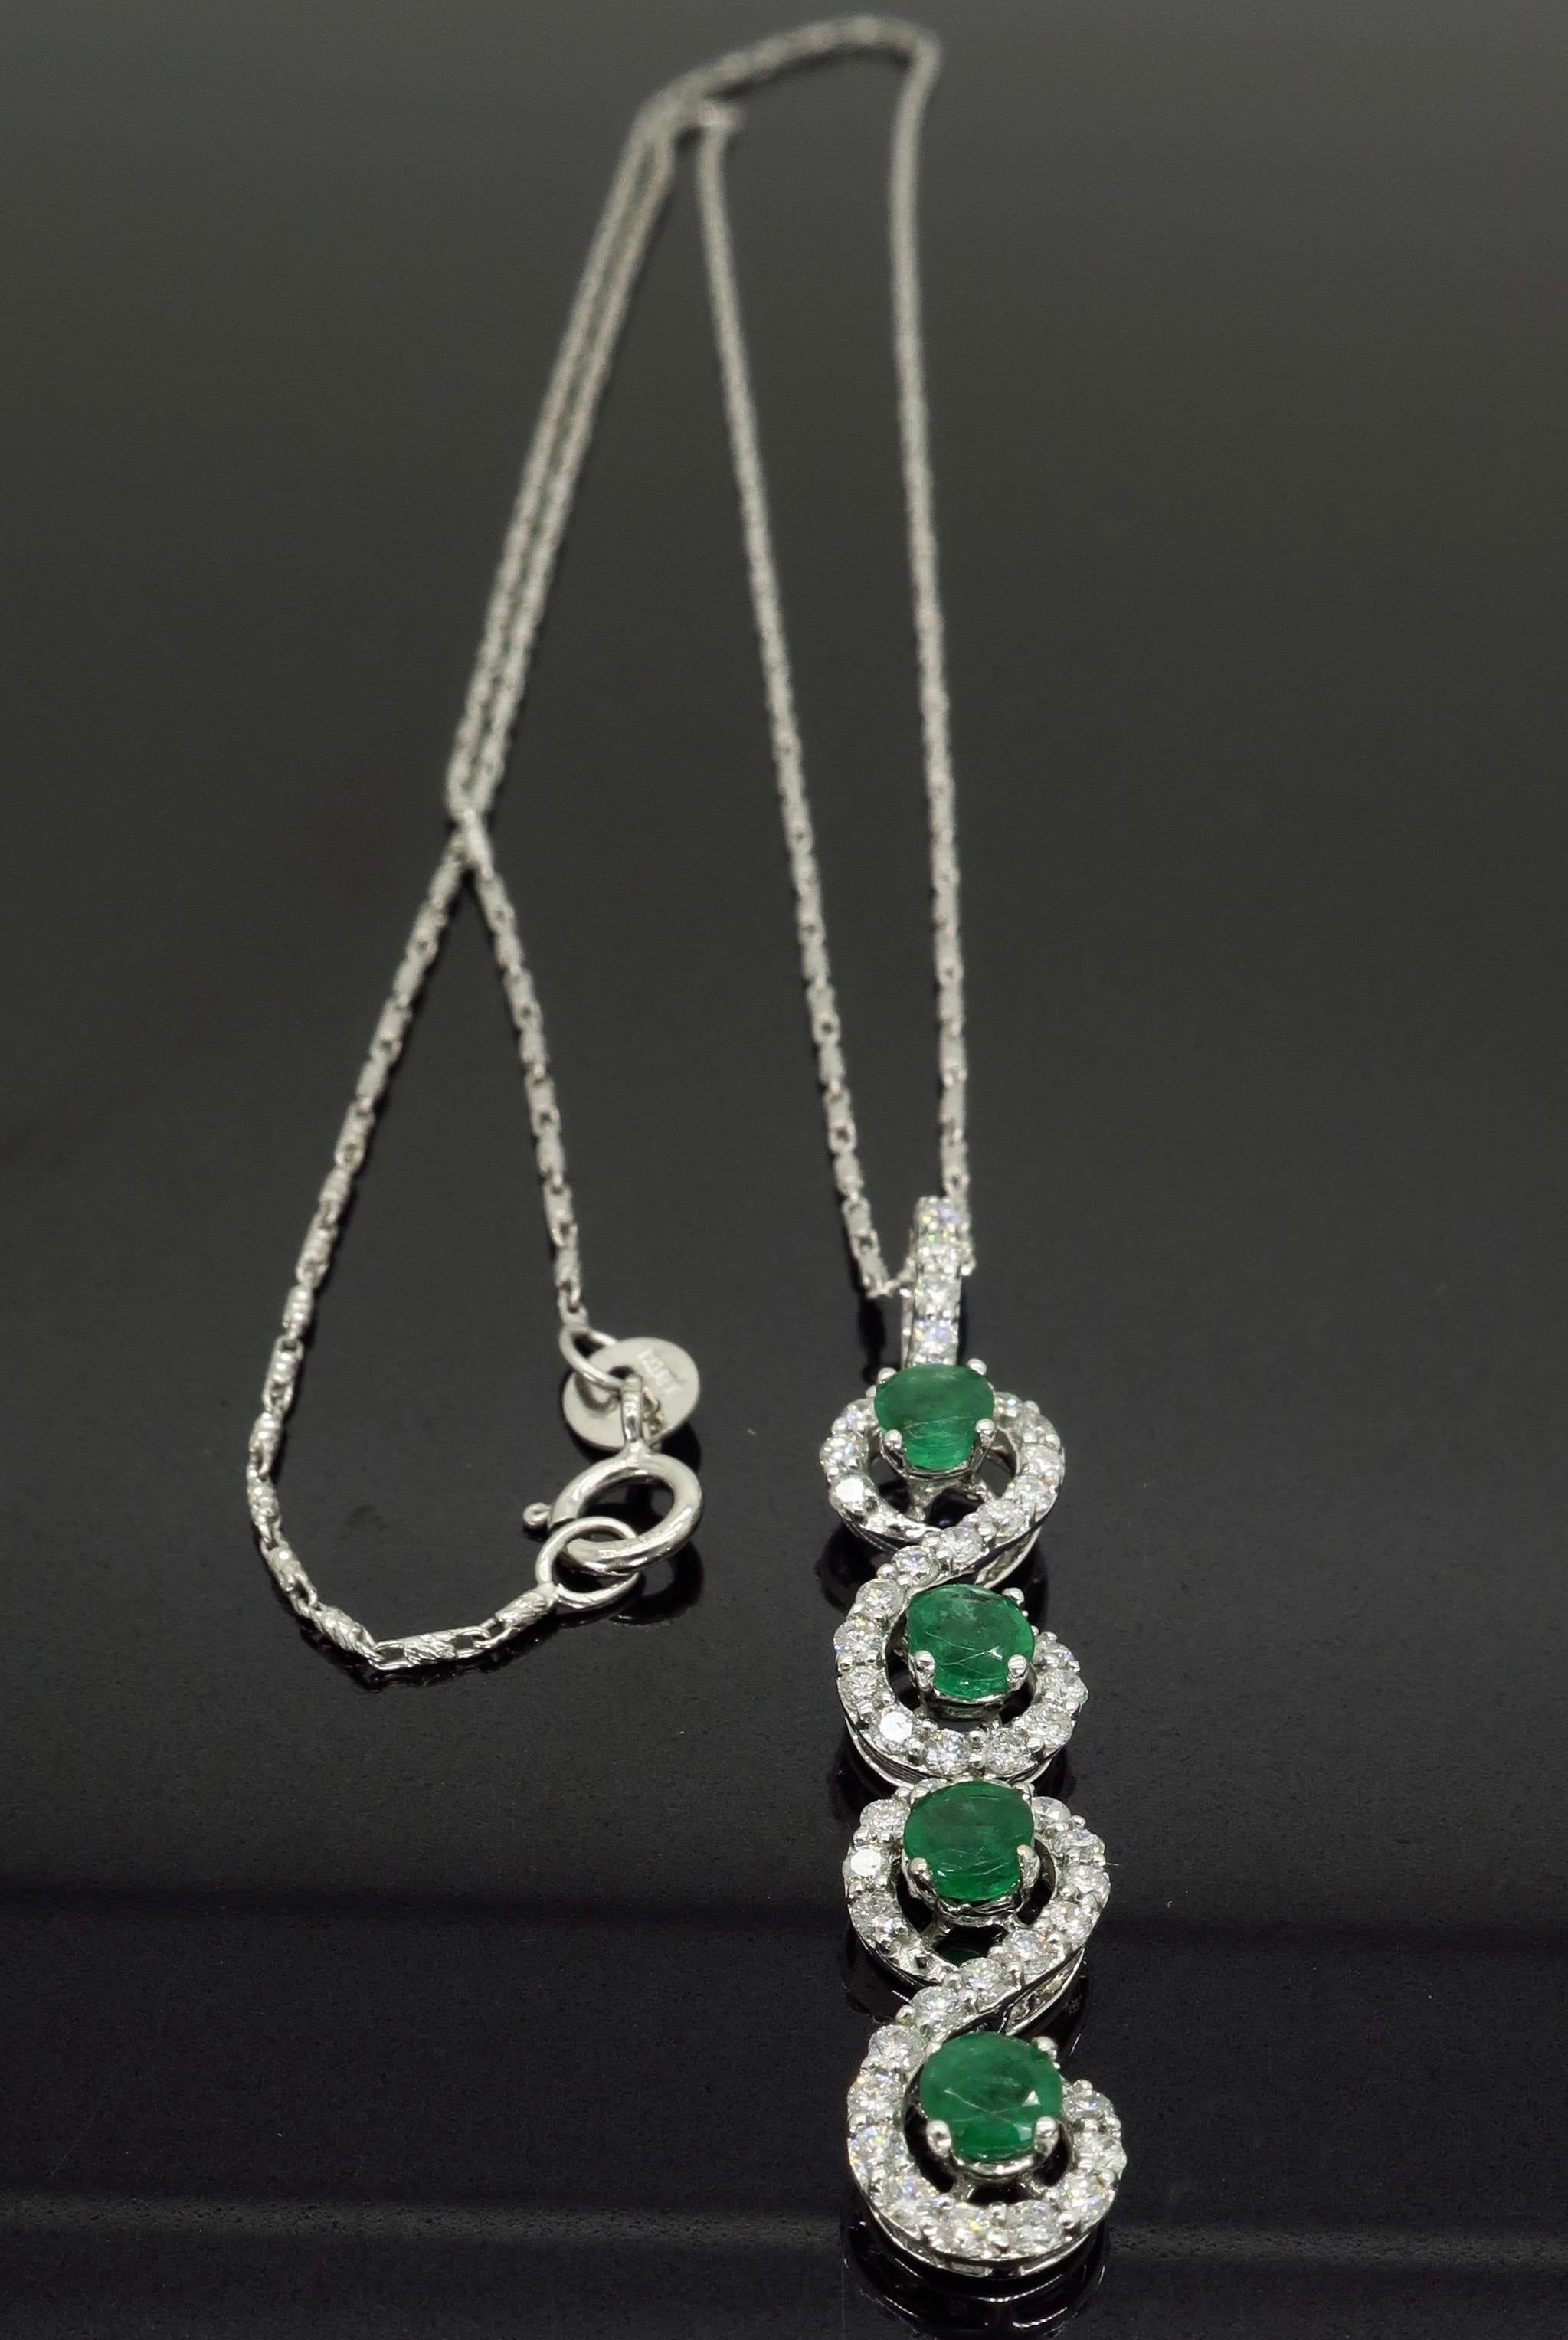 This infinity style necklace features 4 round cut emeralds surrounded by stunning round brilliant cut diamonds.

 
Gemstone: Emerald & Diamonds
Gemstone Carat Weight: .60CTW Round Cut Emeralds
Diamond Carat Weight: Approximately .75CTW
Diamond Cut: